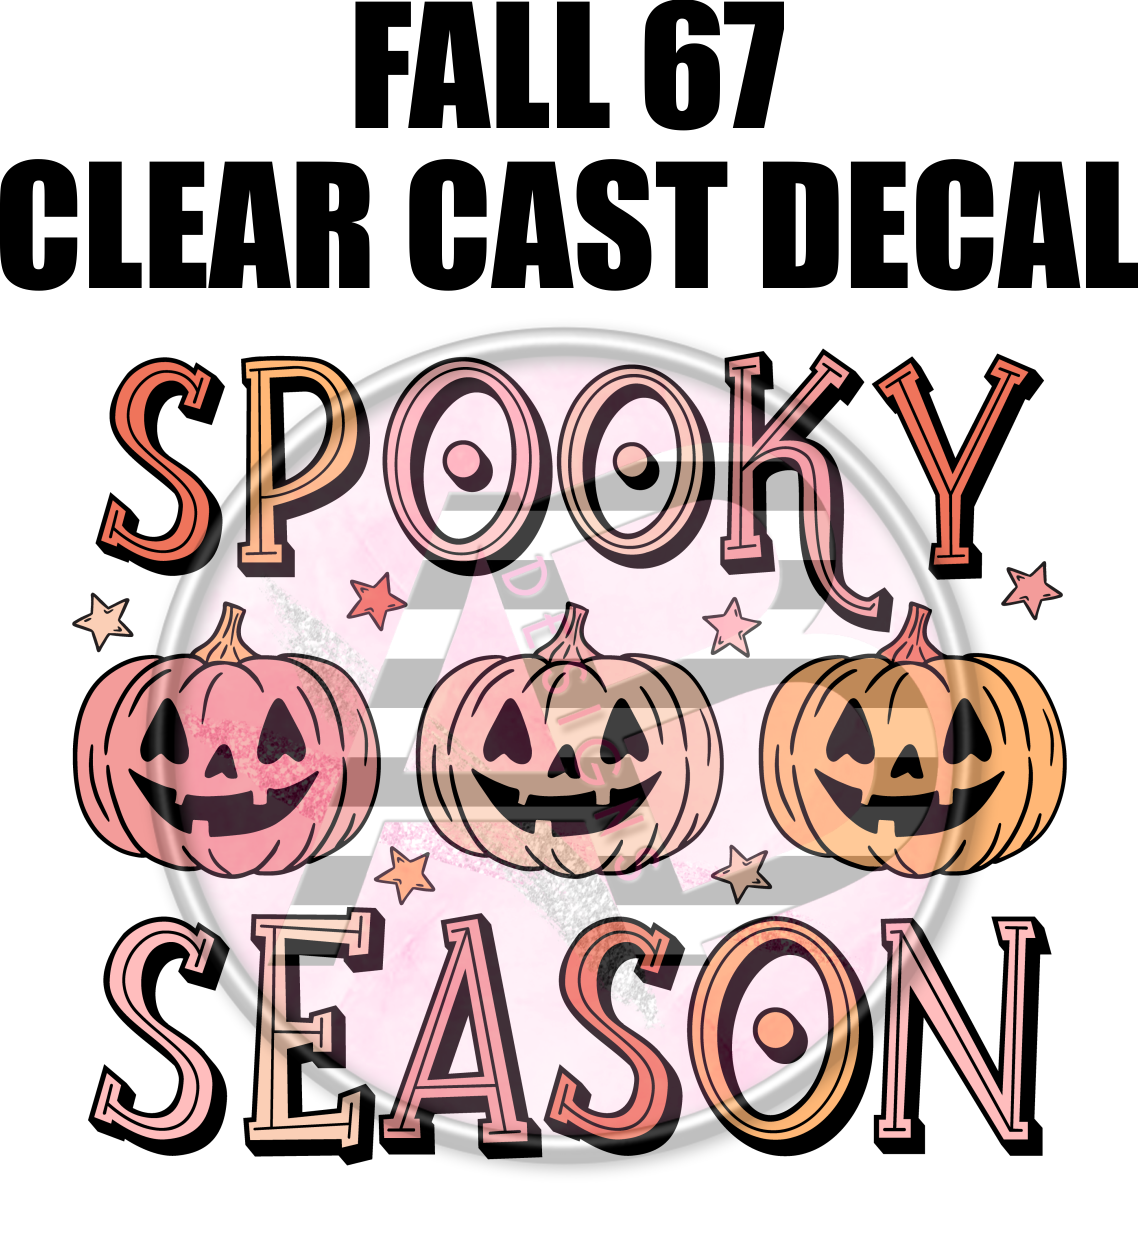 Fall 67 - Clear Cast Decal